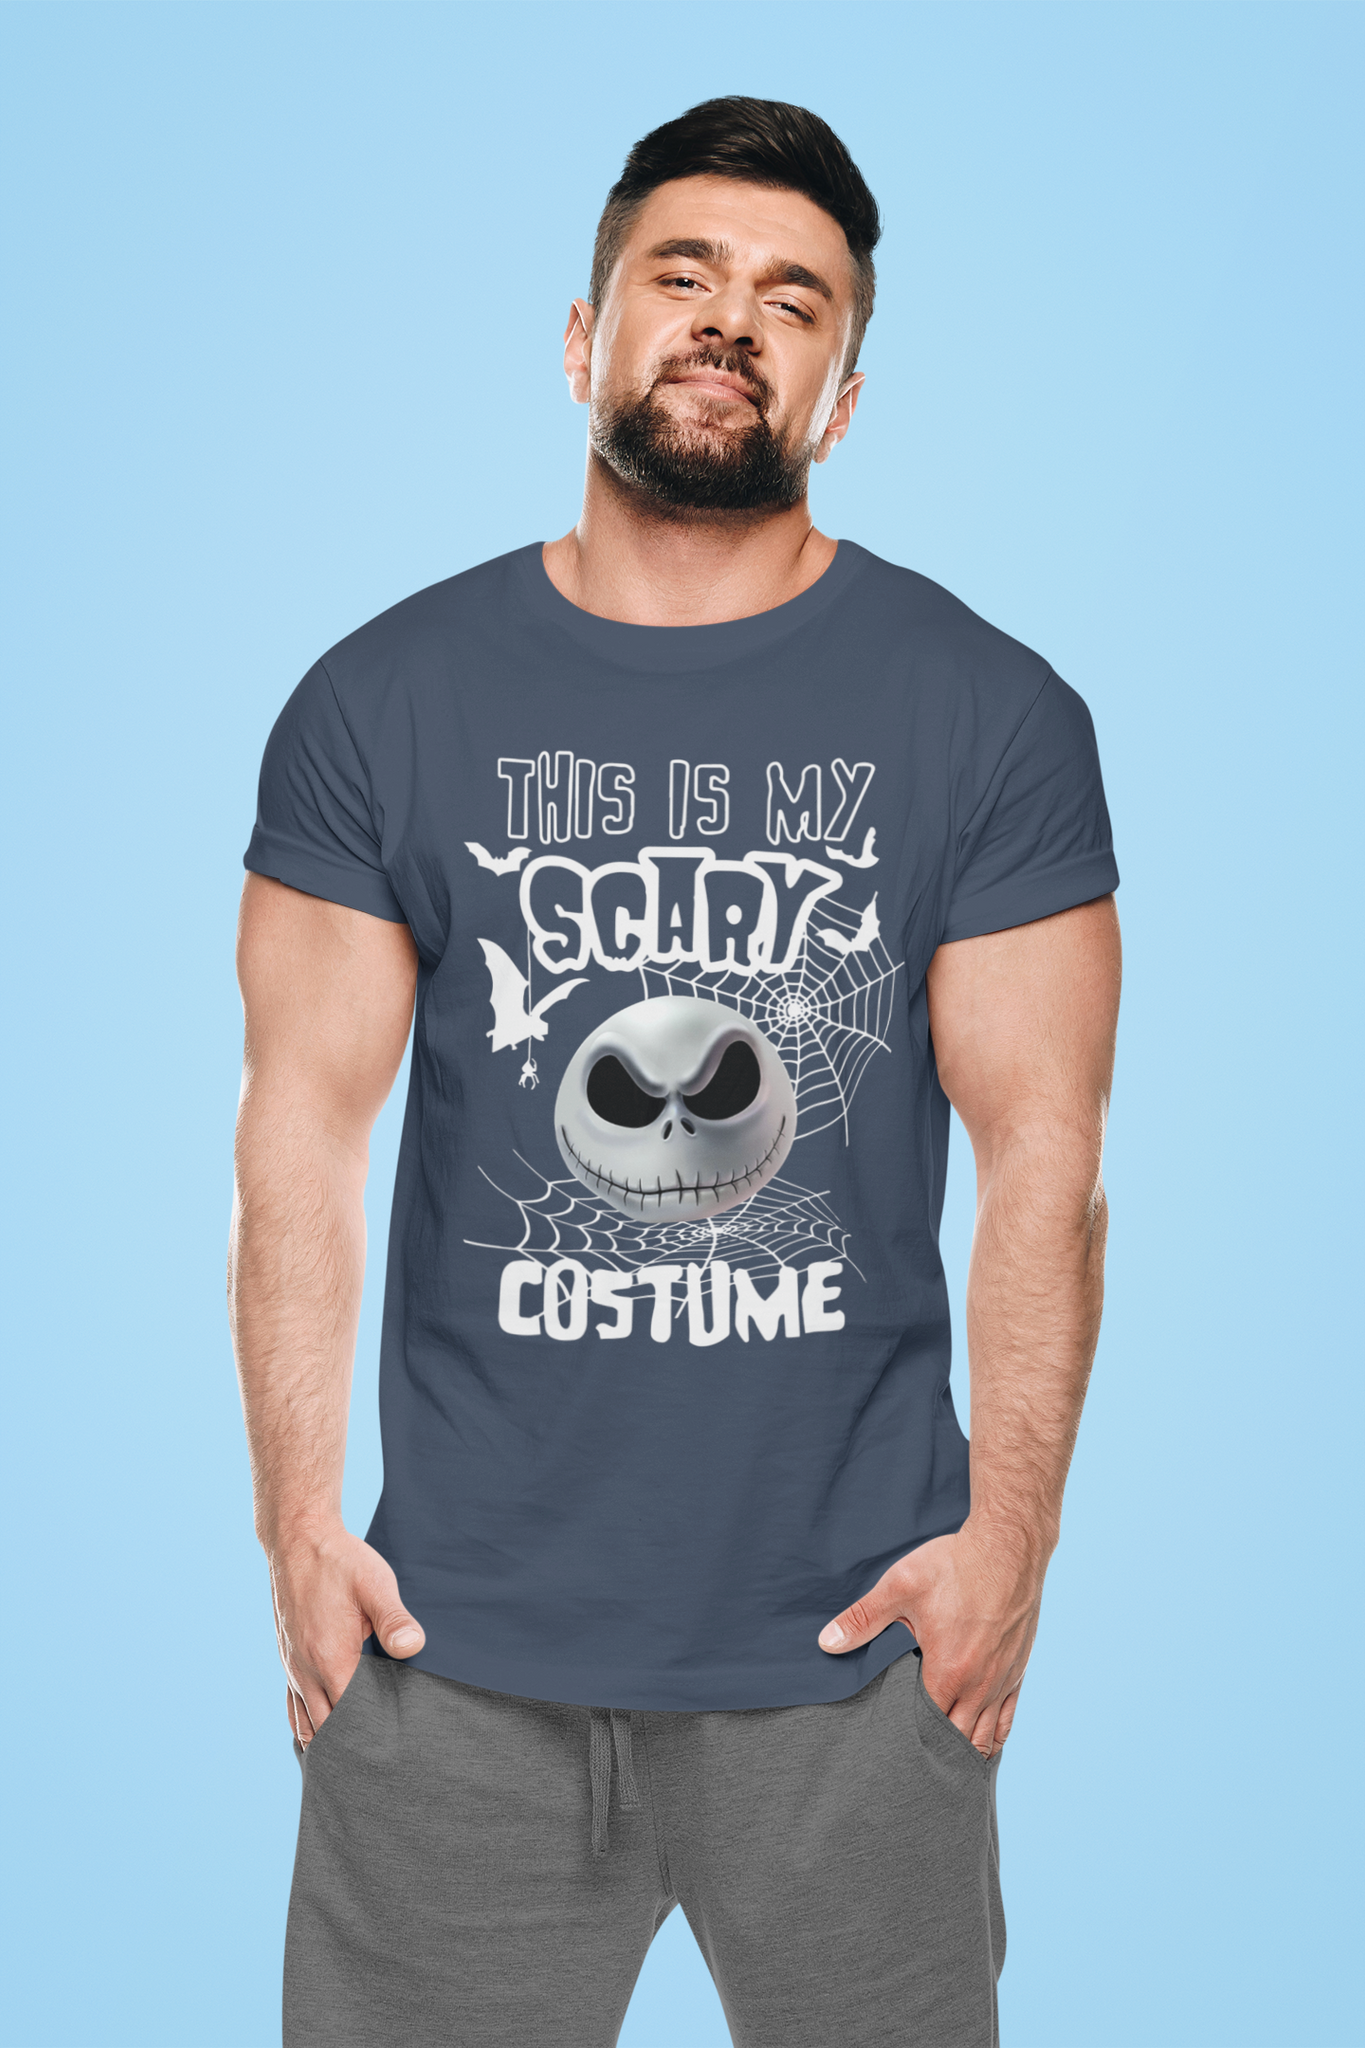 Nightmare Before Christmas T Shirt, This Is My Scary Costume Tshirt, Jack Skellington T Shirt, Halloween Gifts